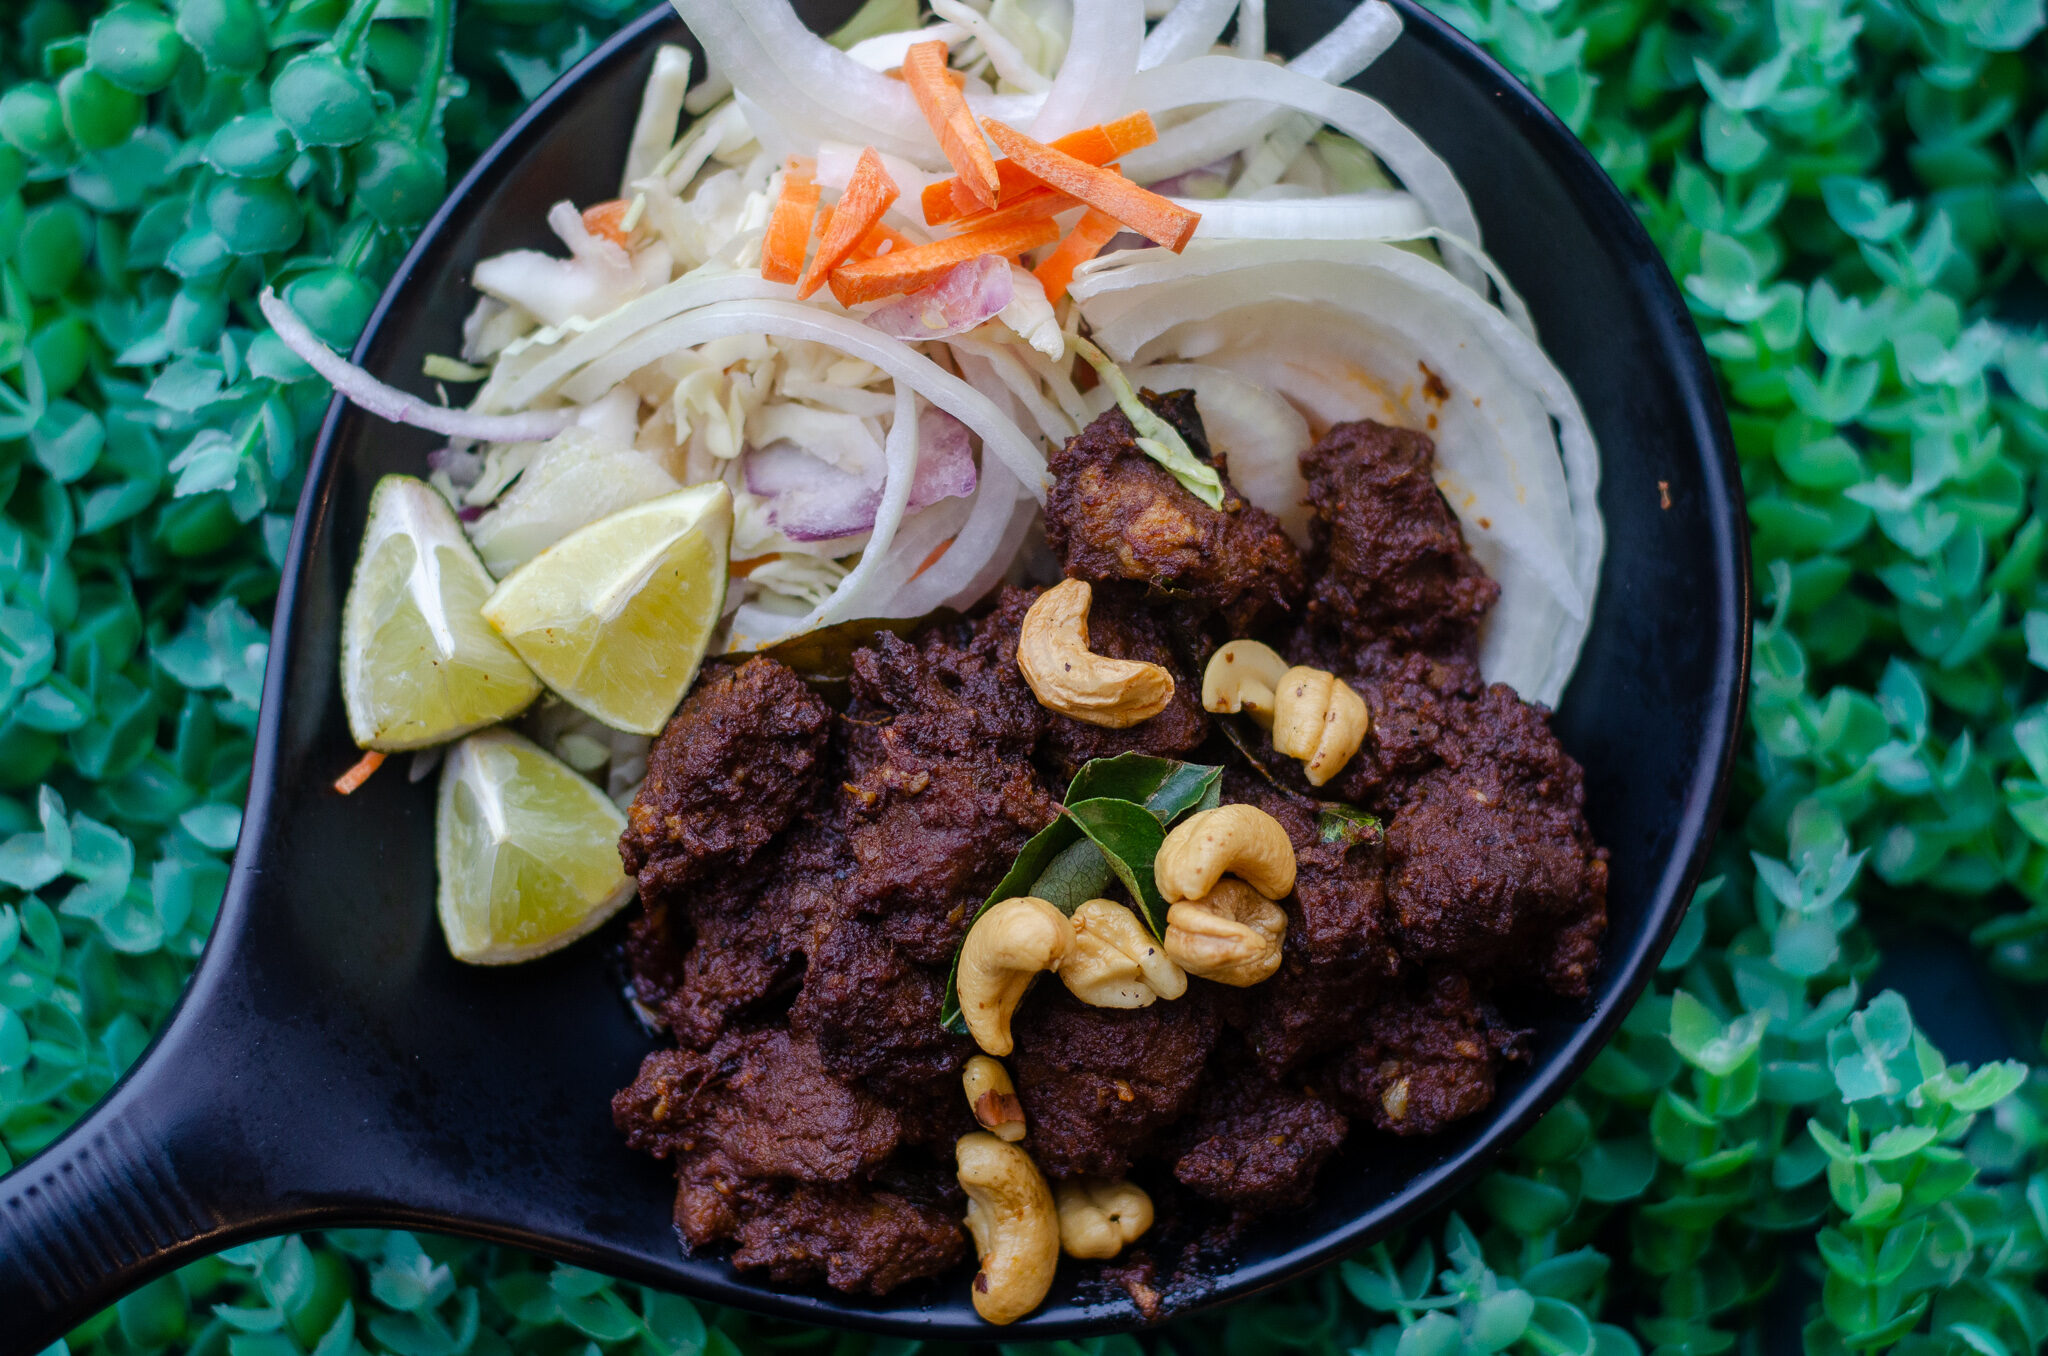 Mutton Pepper Fry from India Paradise in Windsor, Ontario.